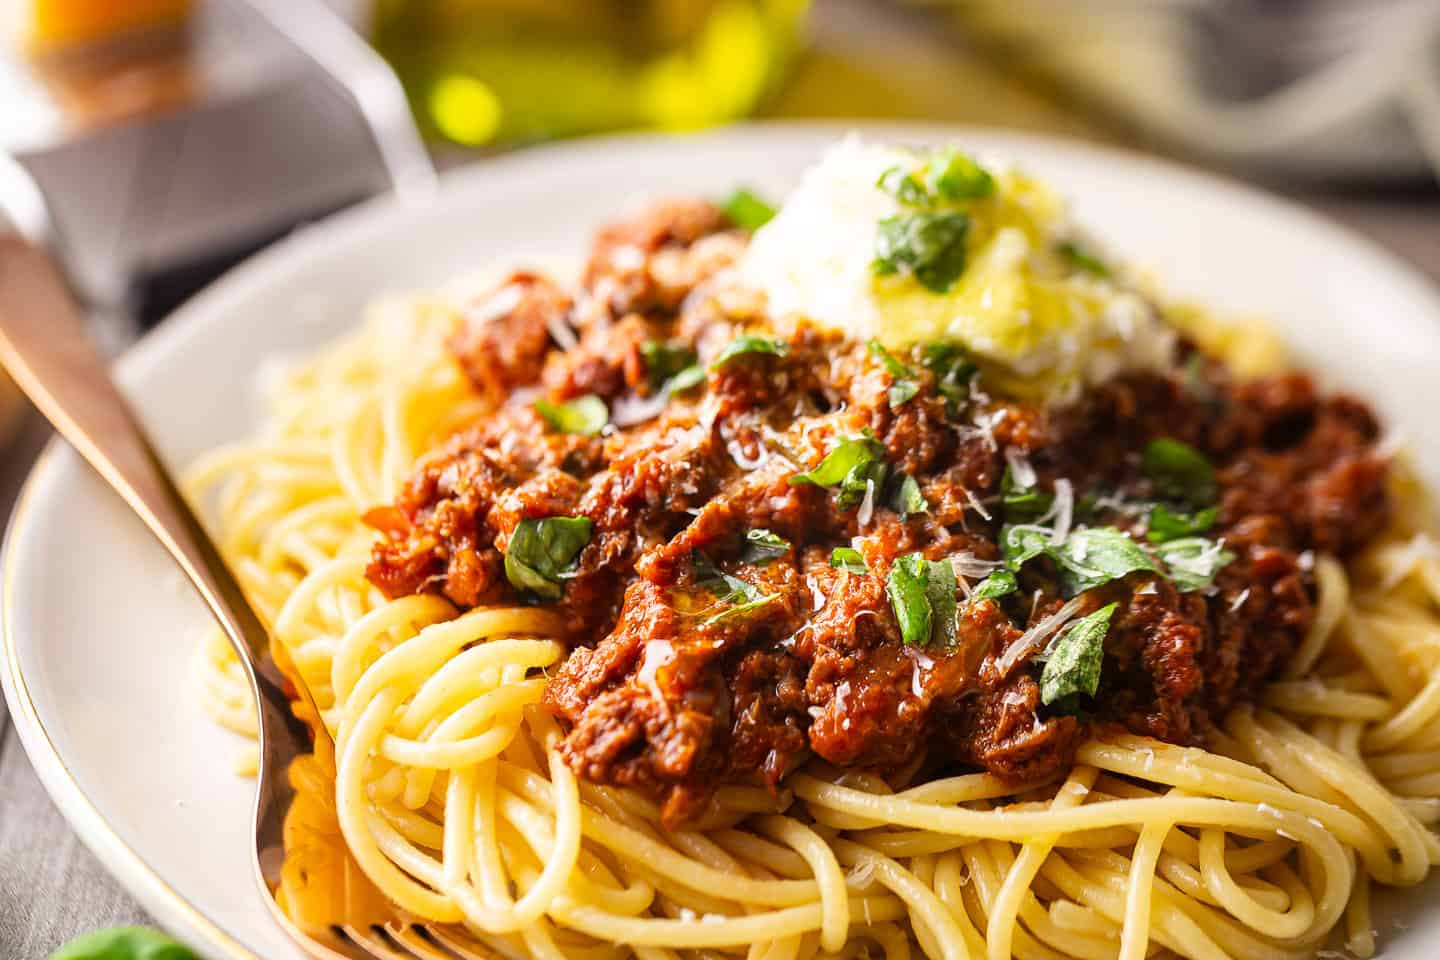 Spaghetti Bolognese garnished with fresh basil, ricotta, parmesan, and olive oil.